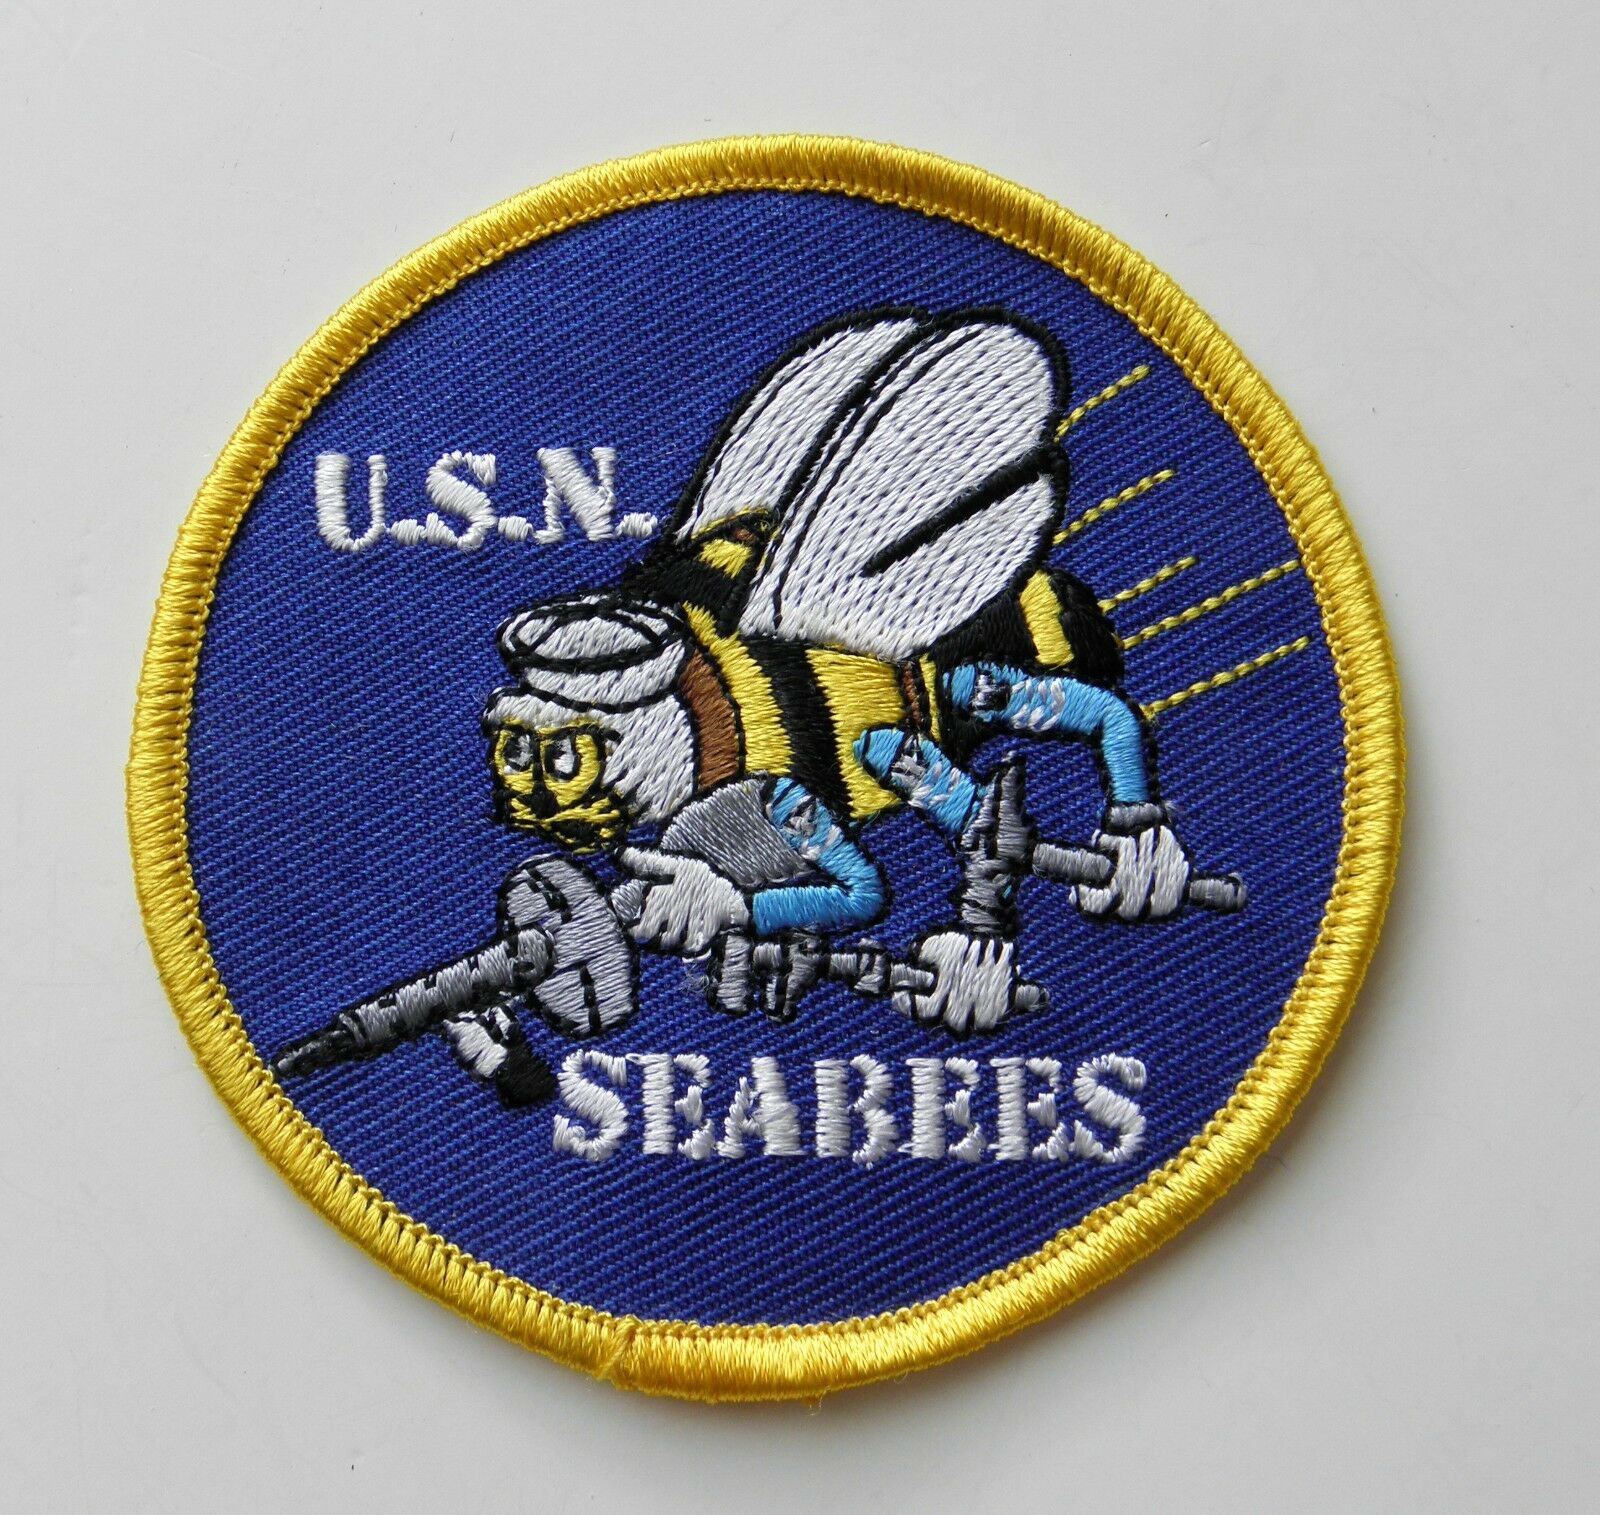 Navy Seabees 3/" Patch